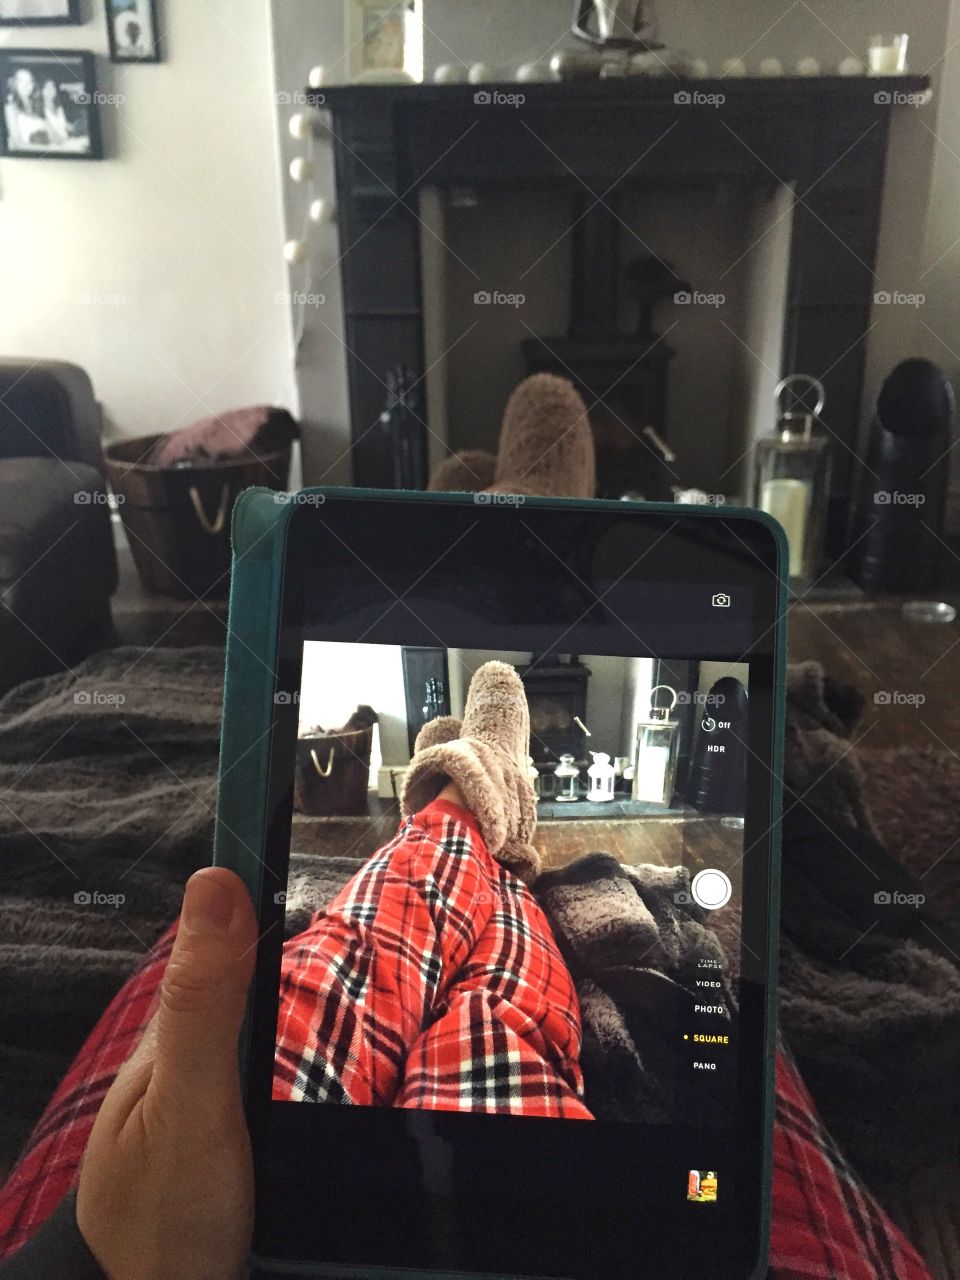 iPad and chill